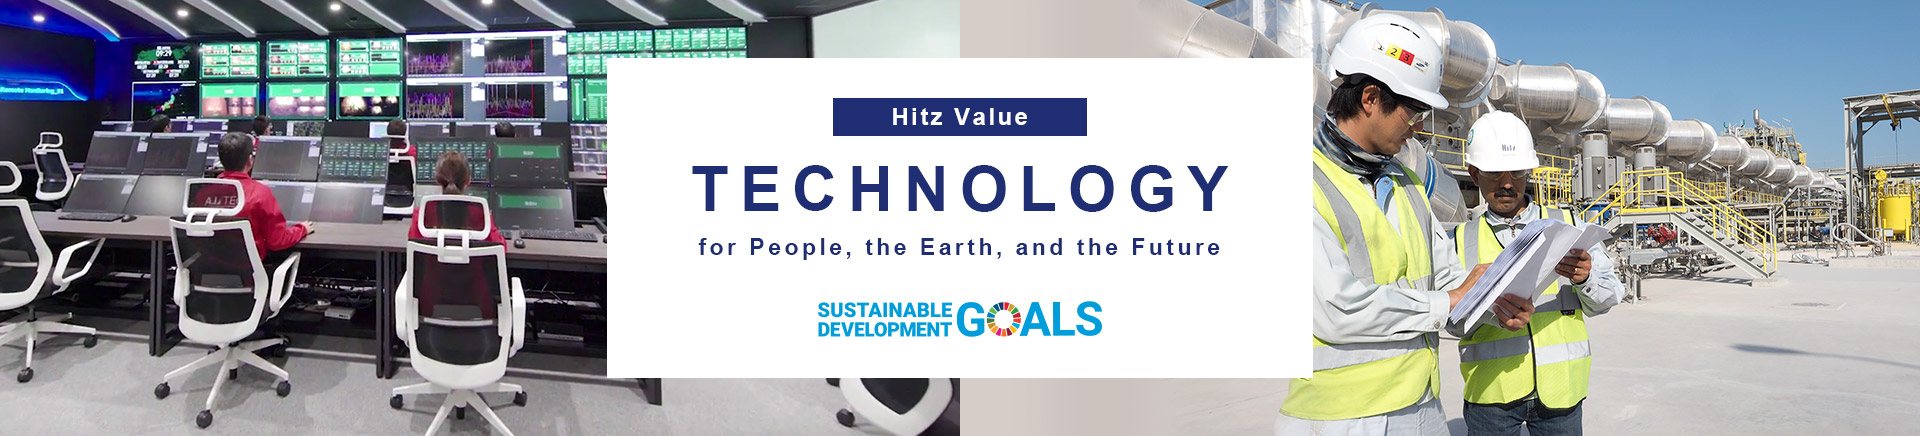 Hitz Value TECHNOLOGY for People, the Earth, and the Future 